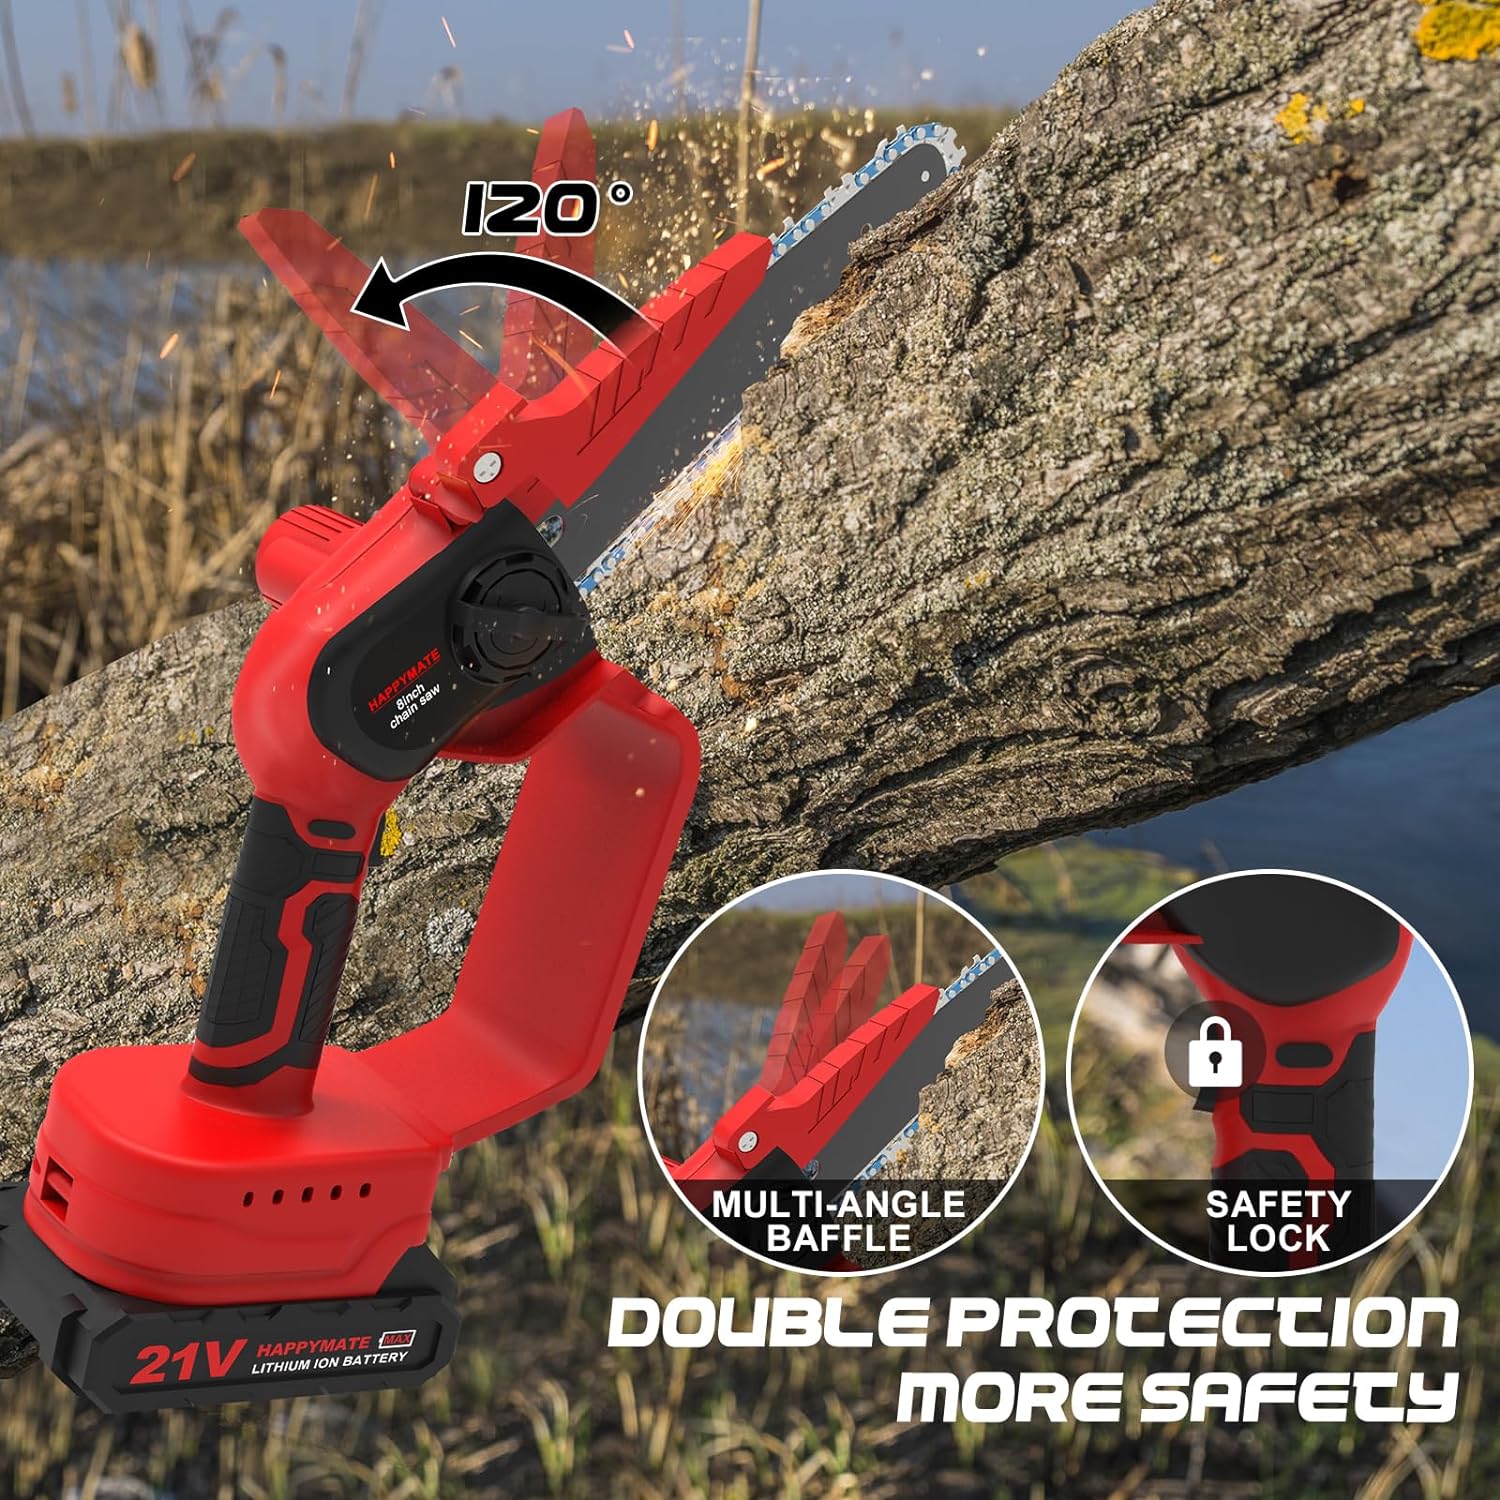 Mini Chainsaw Cordless 8 Inch,HAPPYMATE Mini Chainsaw with 2 Packs Rechargeable Batteries,One-Handed Electric Chainsaw for Wood Branch Cutting and Tree Trimming,Red